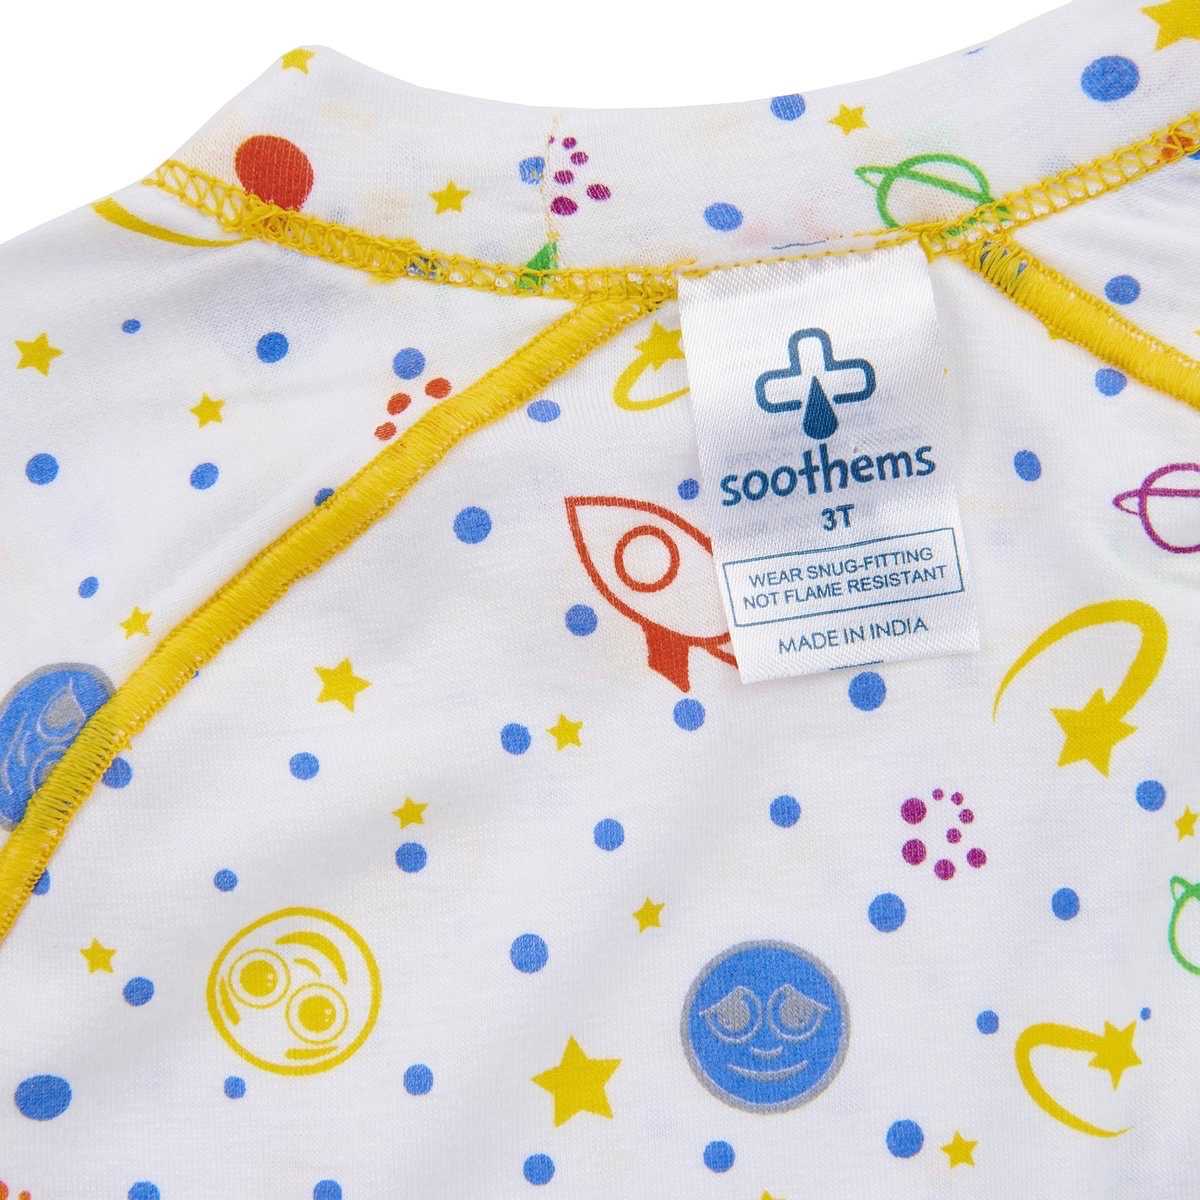 "Sensory Disorder and Eczema Clothing toddler and children sizes 2T -10"